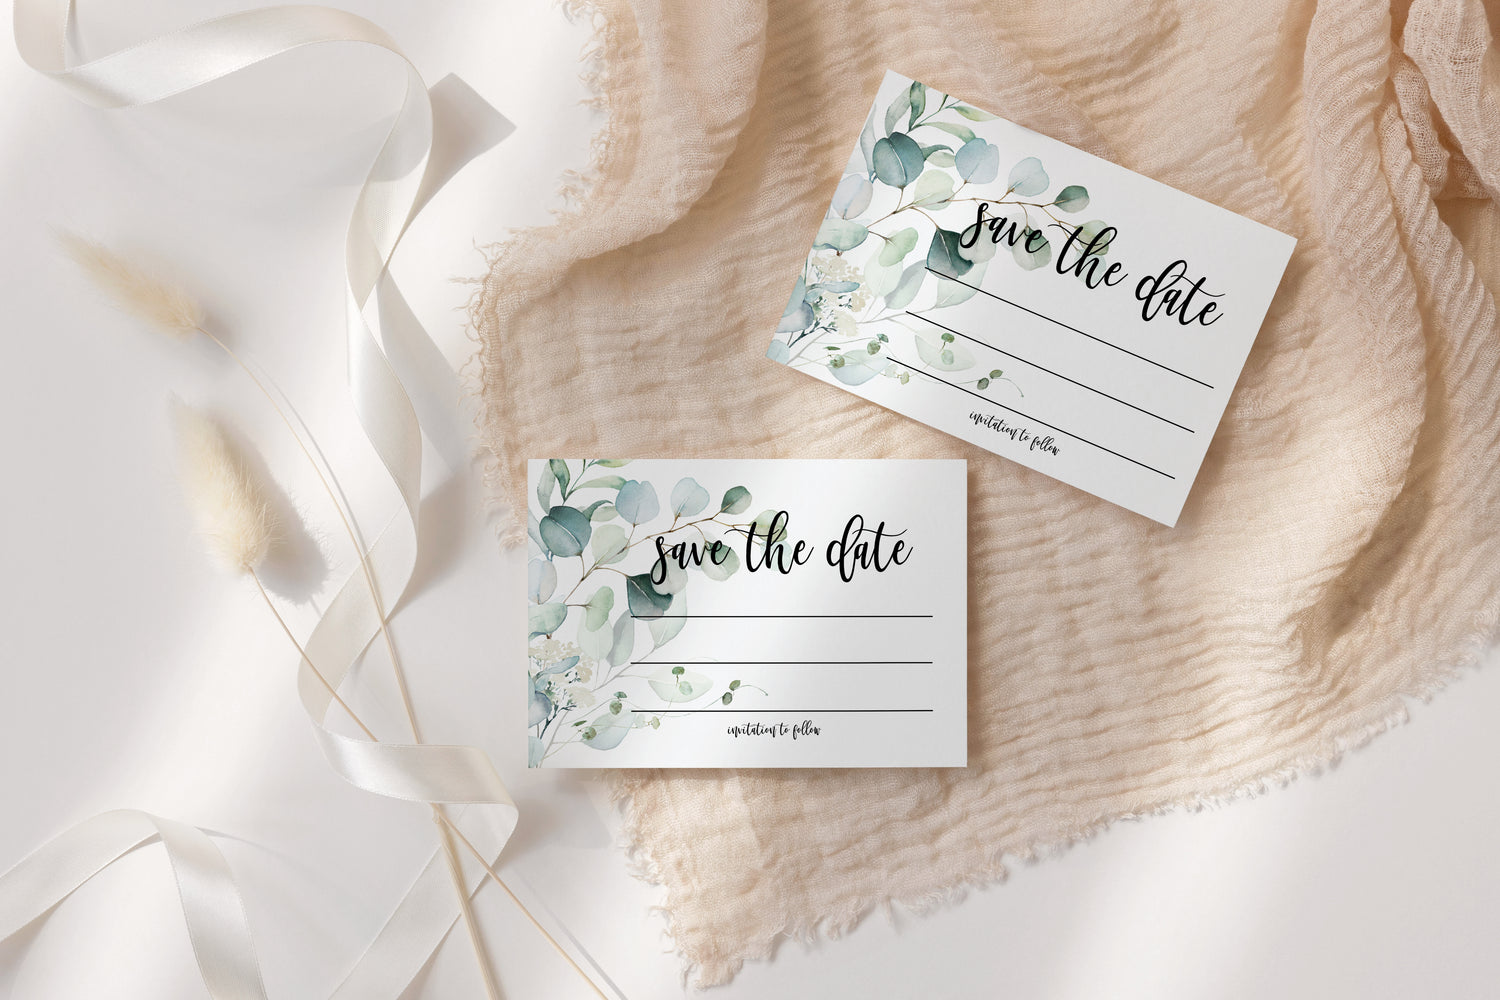 Mark your calendars in style with our versatile save-the-date cards for every occasion. From intimate gatherings to grand celebrations, find the perfect design to announce your event.